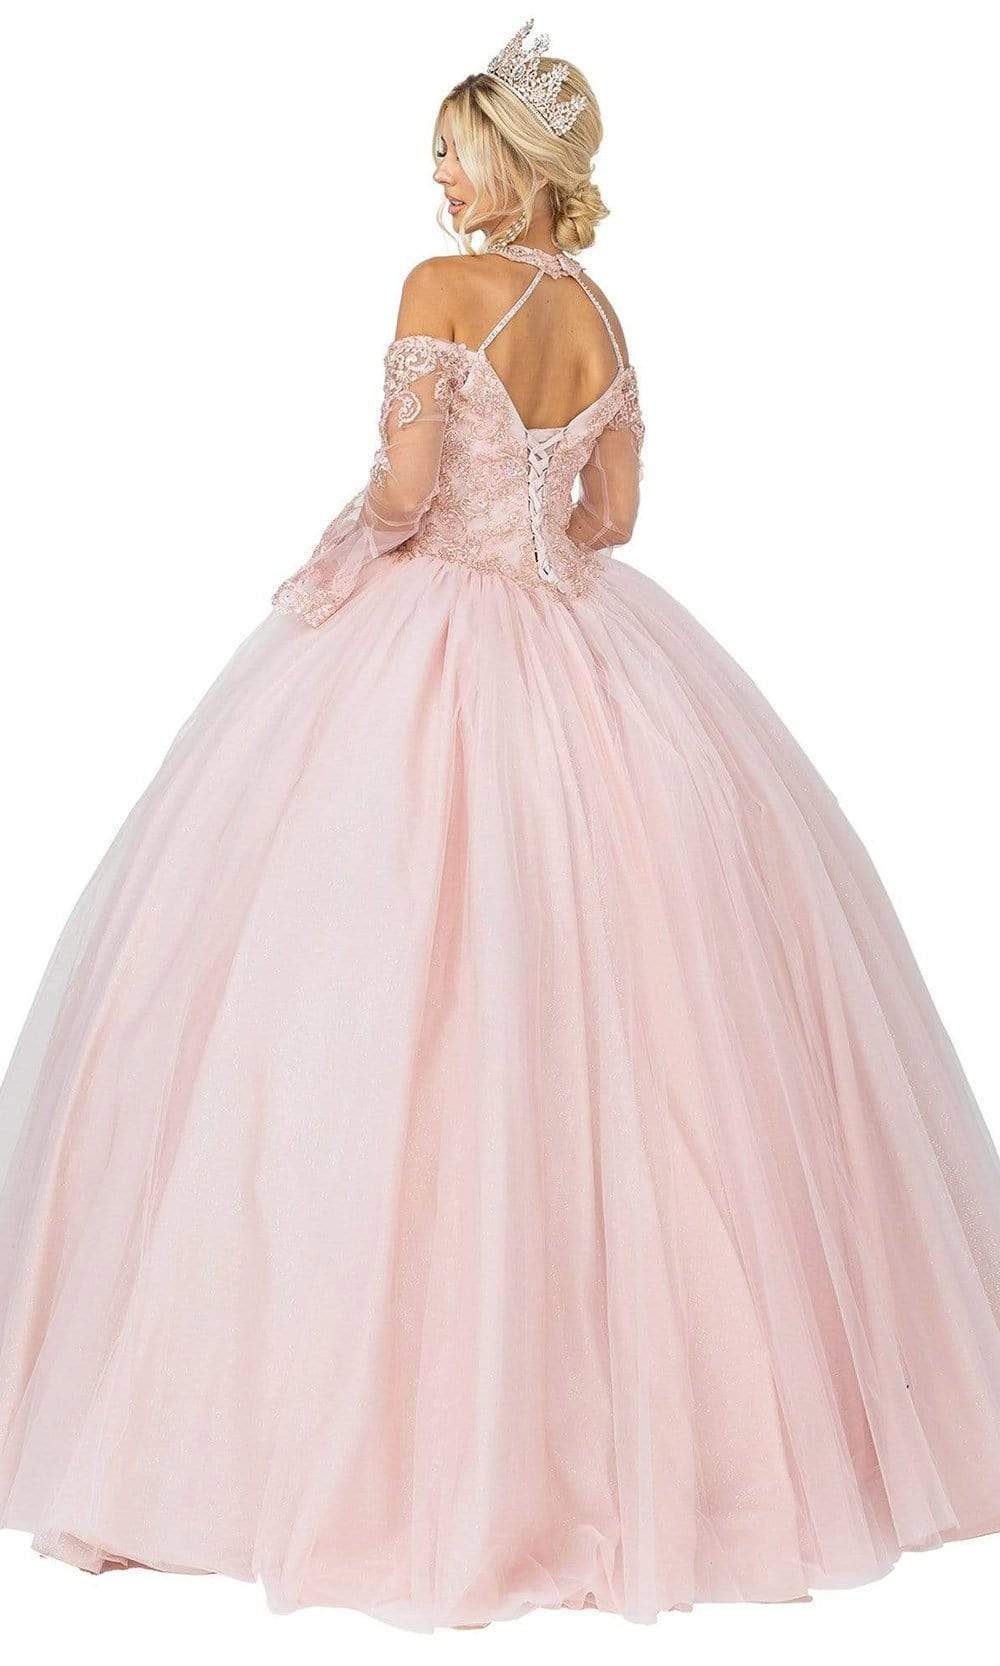 Dancing Queen - 1393 Embroidered Bell Sleeve Ballgown Quinceanera Dresses